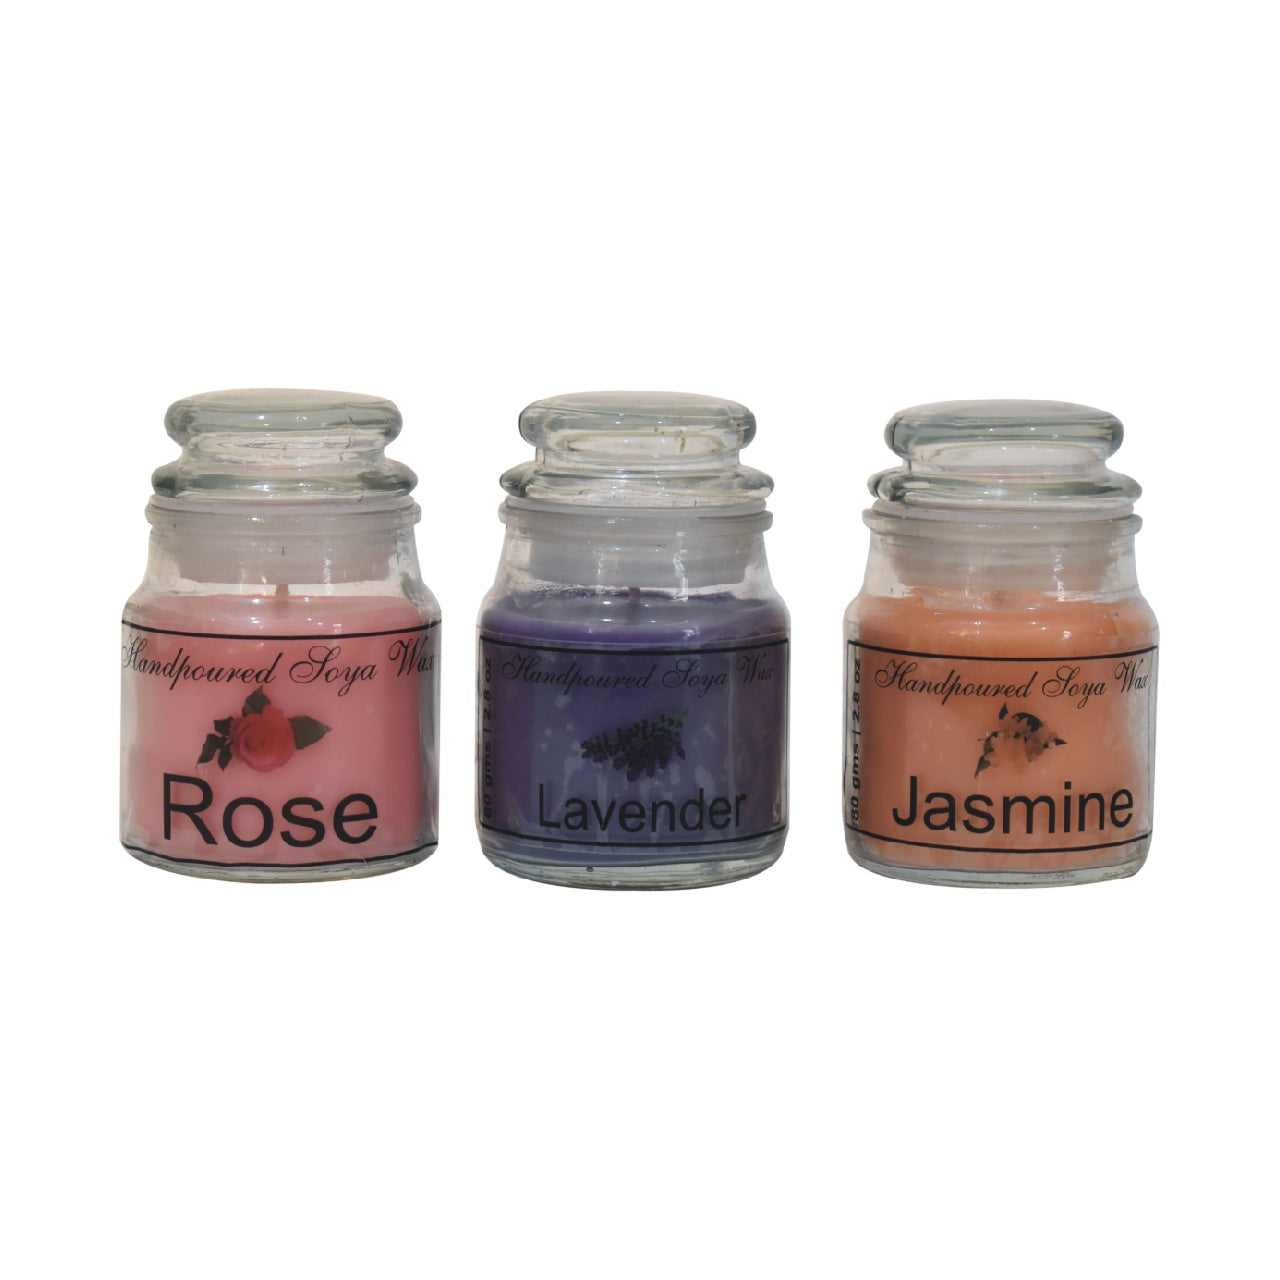 View Hourglass Candle Set of 3 Rose Lavender Jasmine information